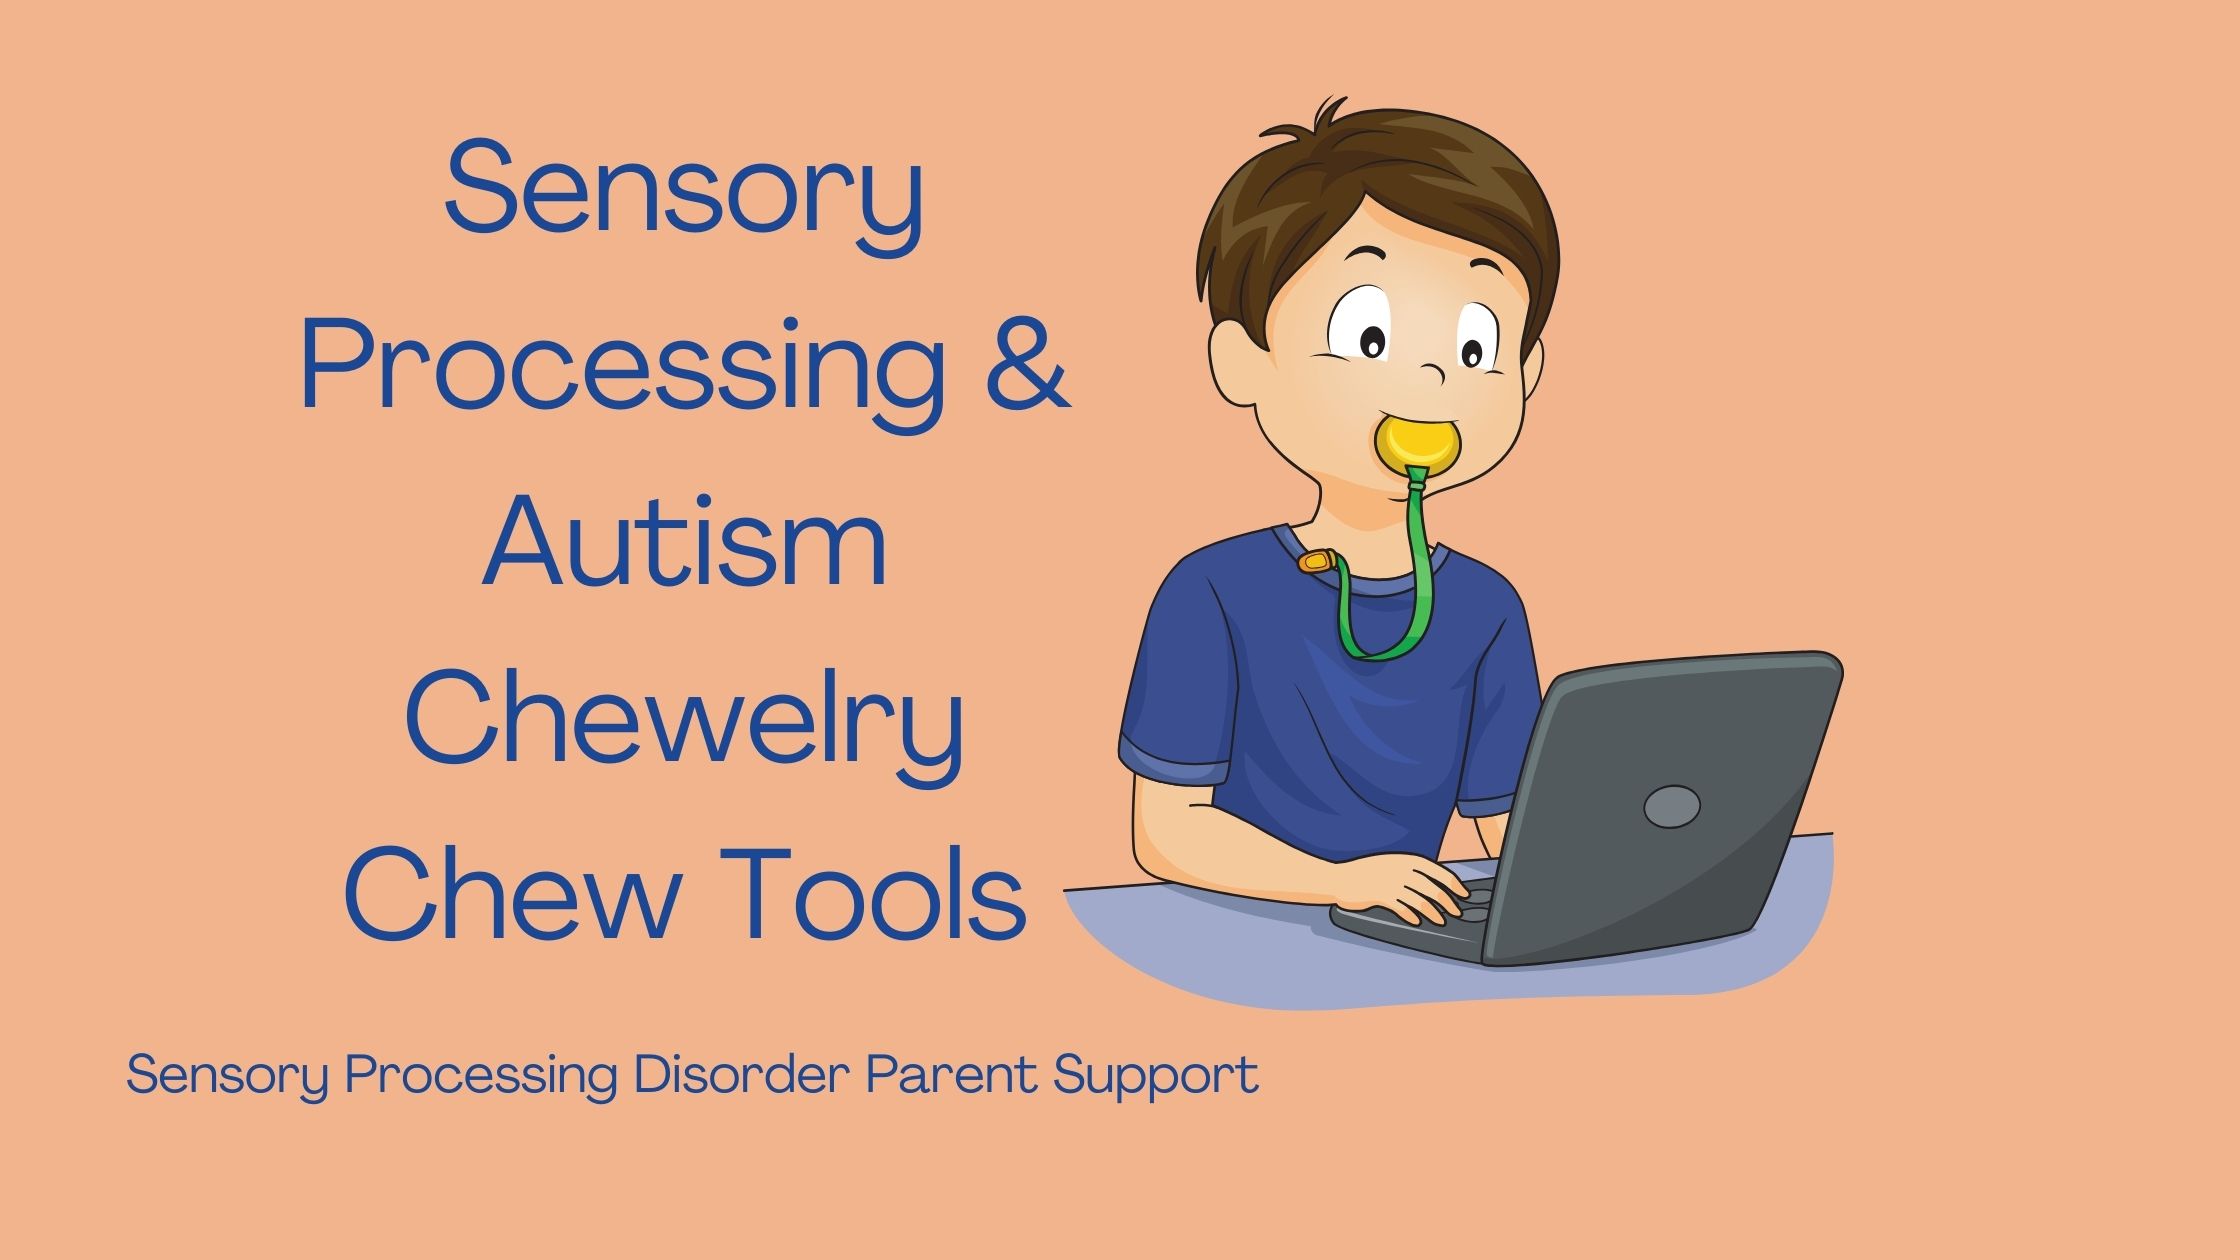 Boy with sensory processing disorder sitting at his laptop chewing on a chewelry chew necklace Sensory Processing & Autism Chewelry Chew Tools